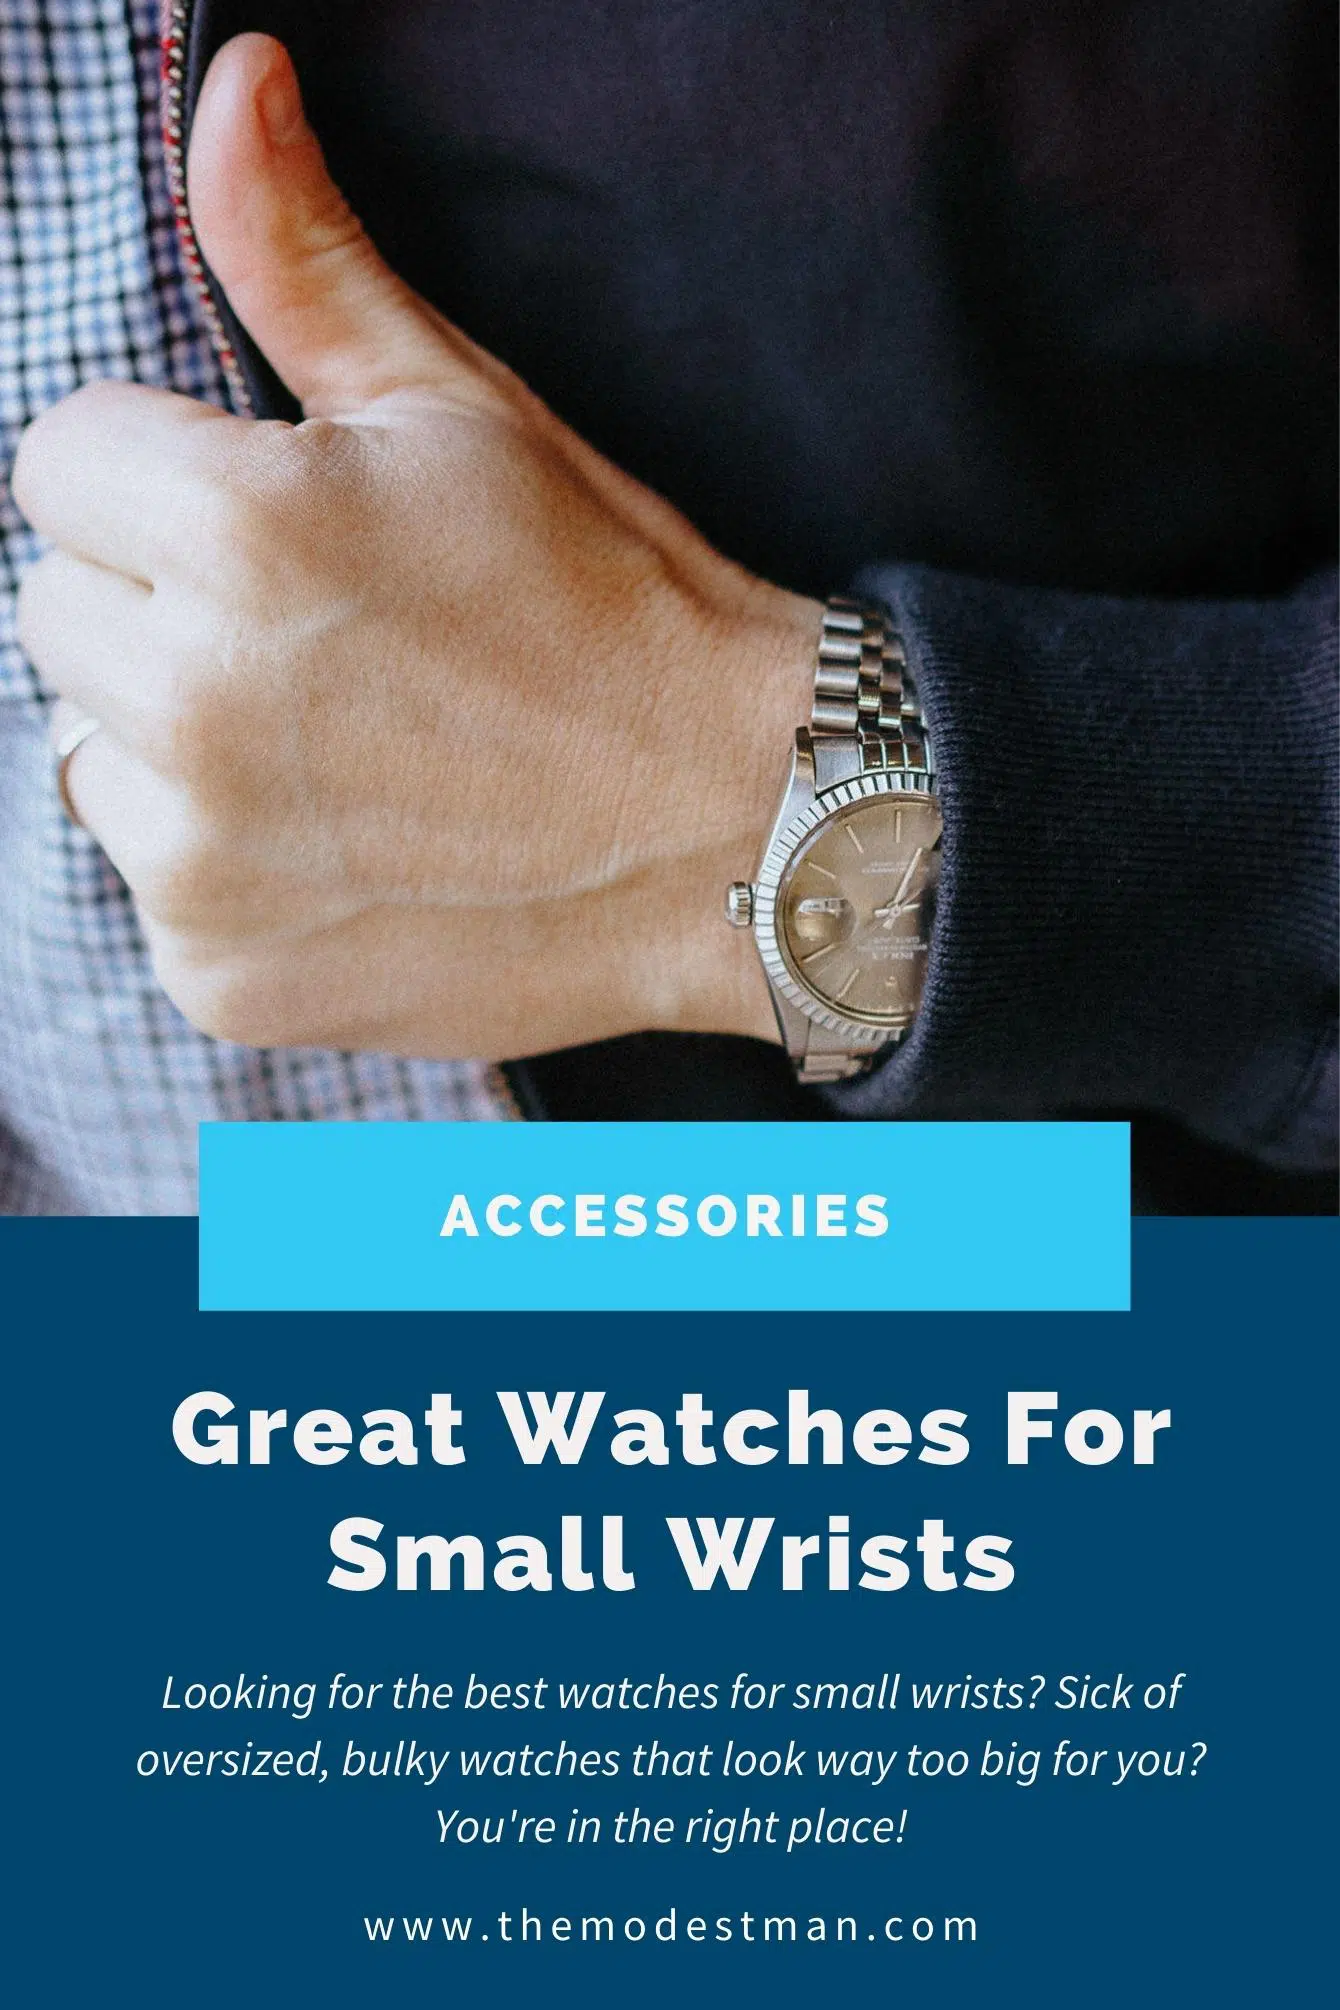 Great Watches for Small Wrists